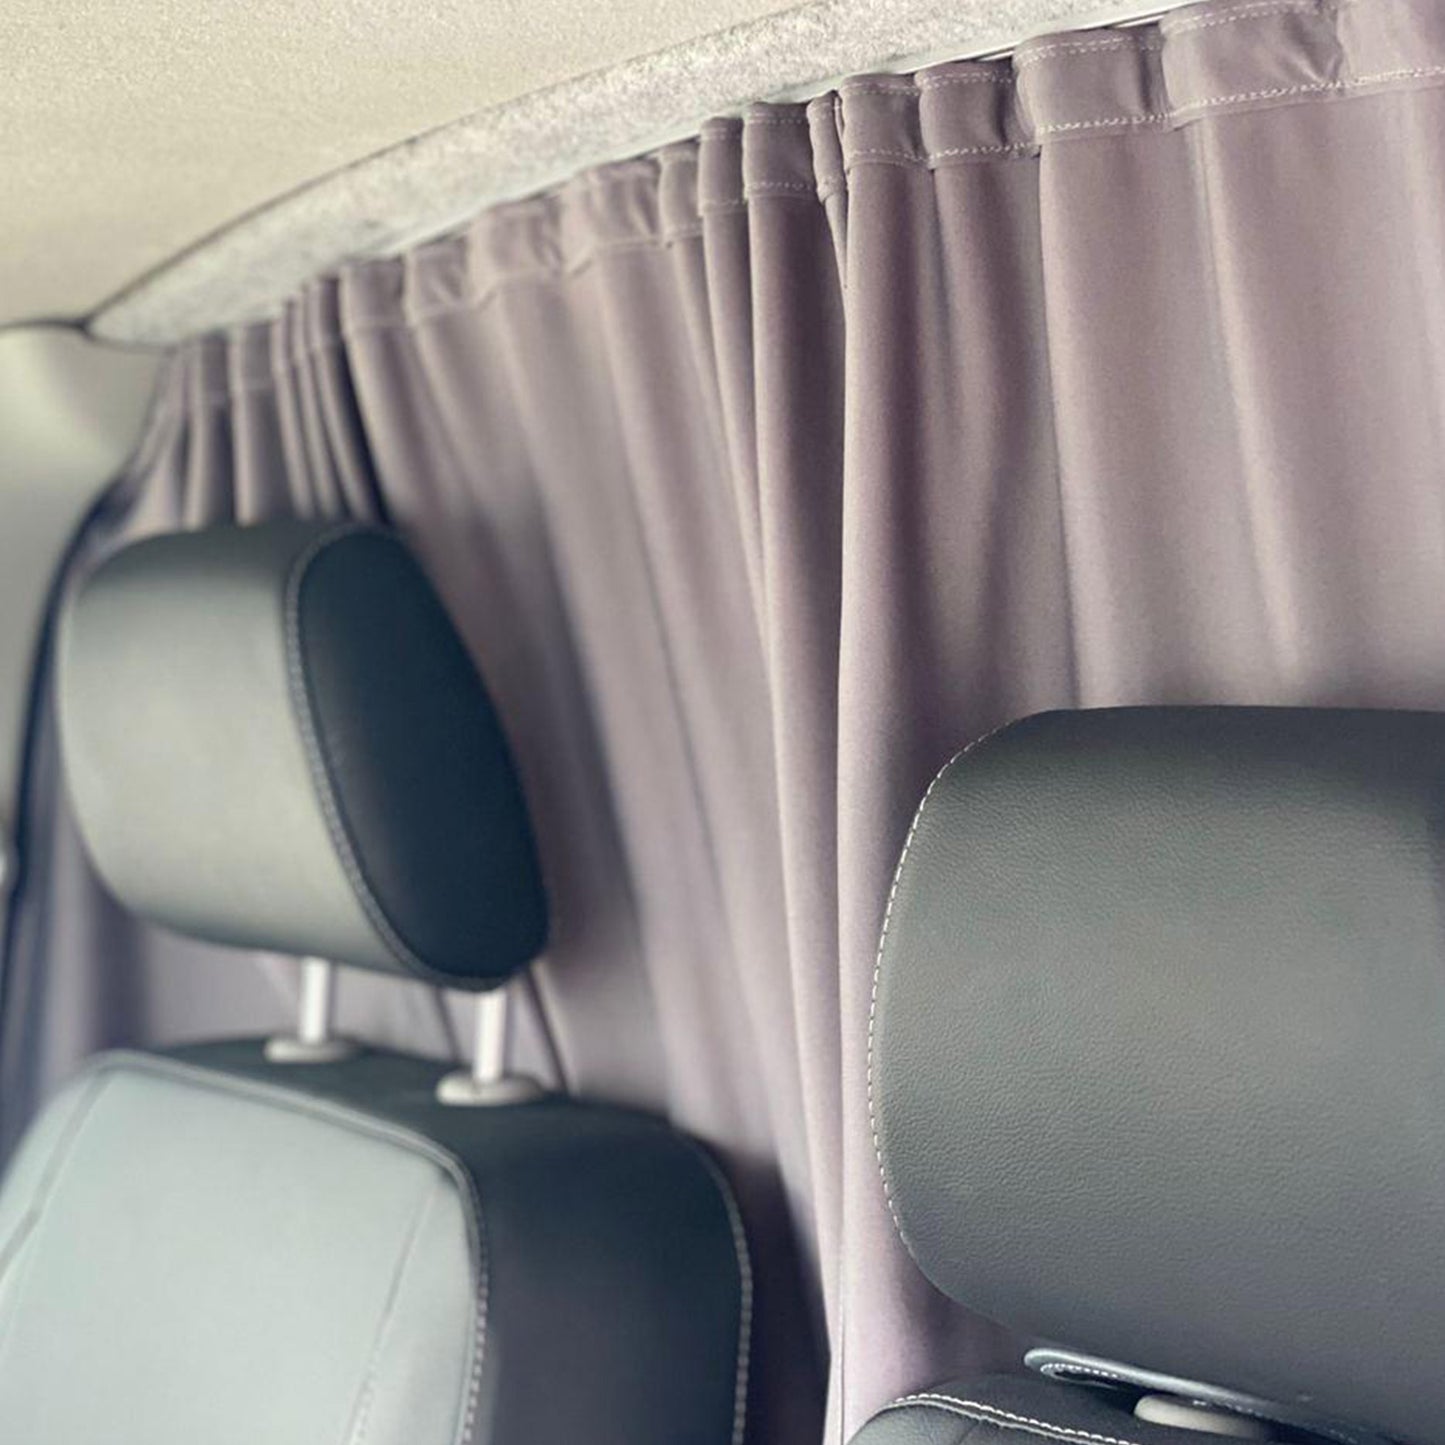 Citroen Relay Motorhome Campervan Cab Divider Curtains With Rail